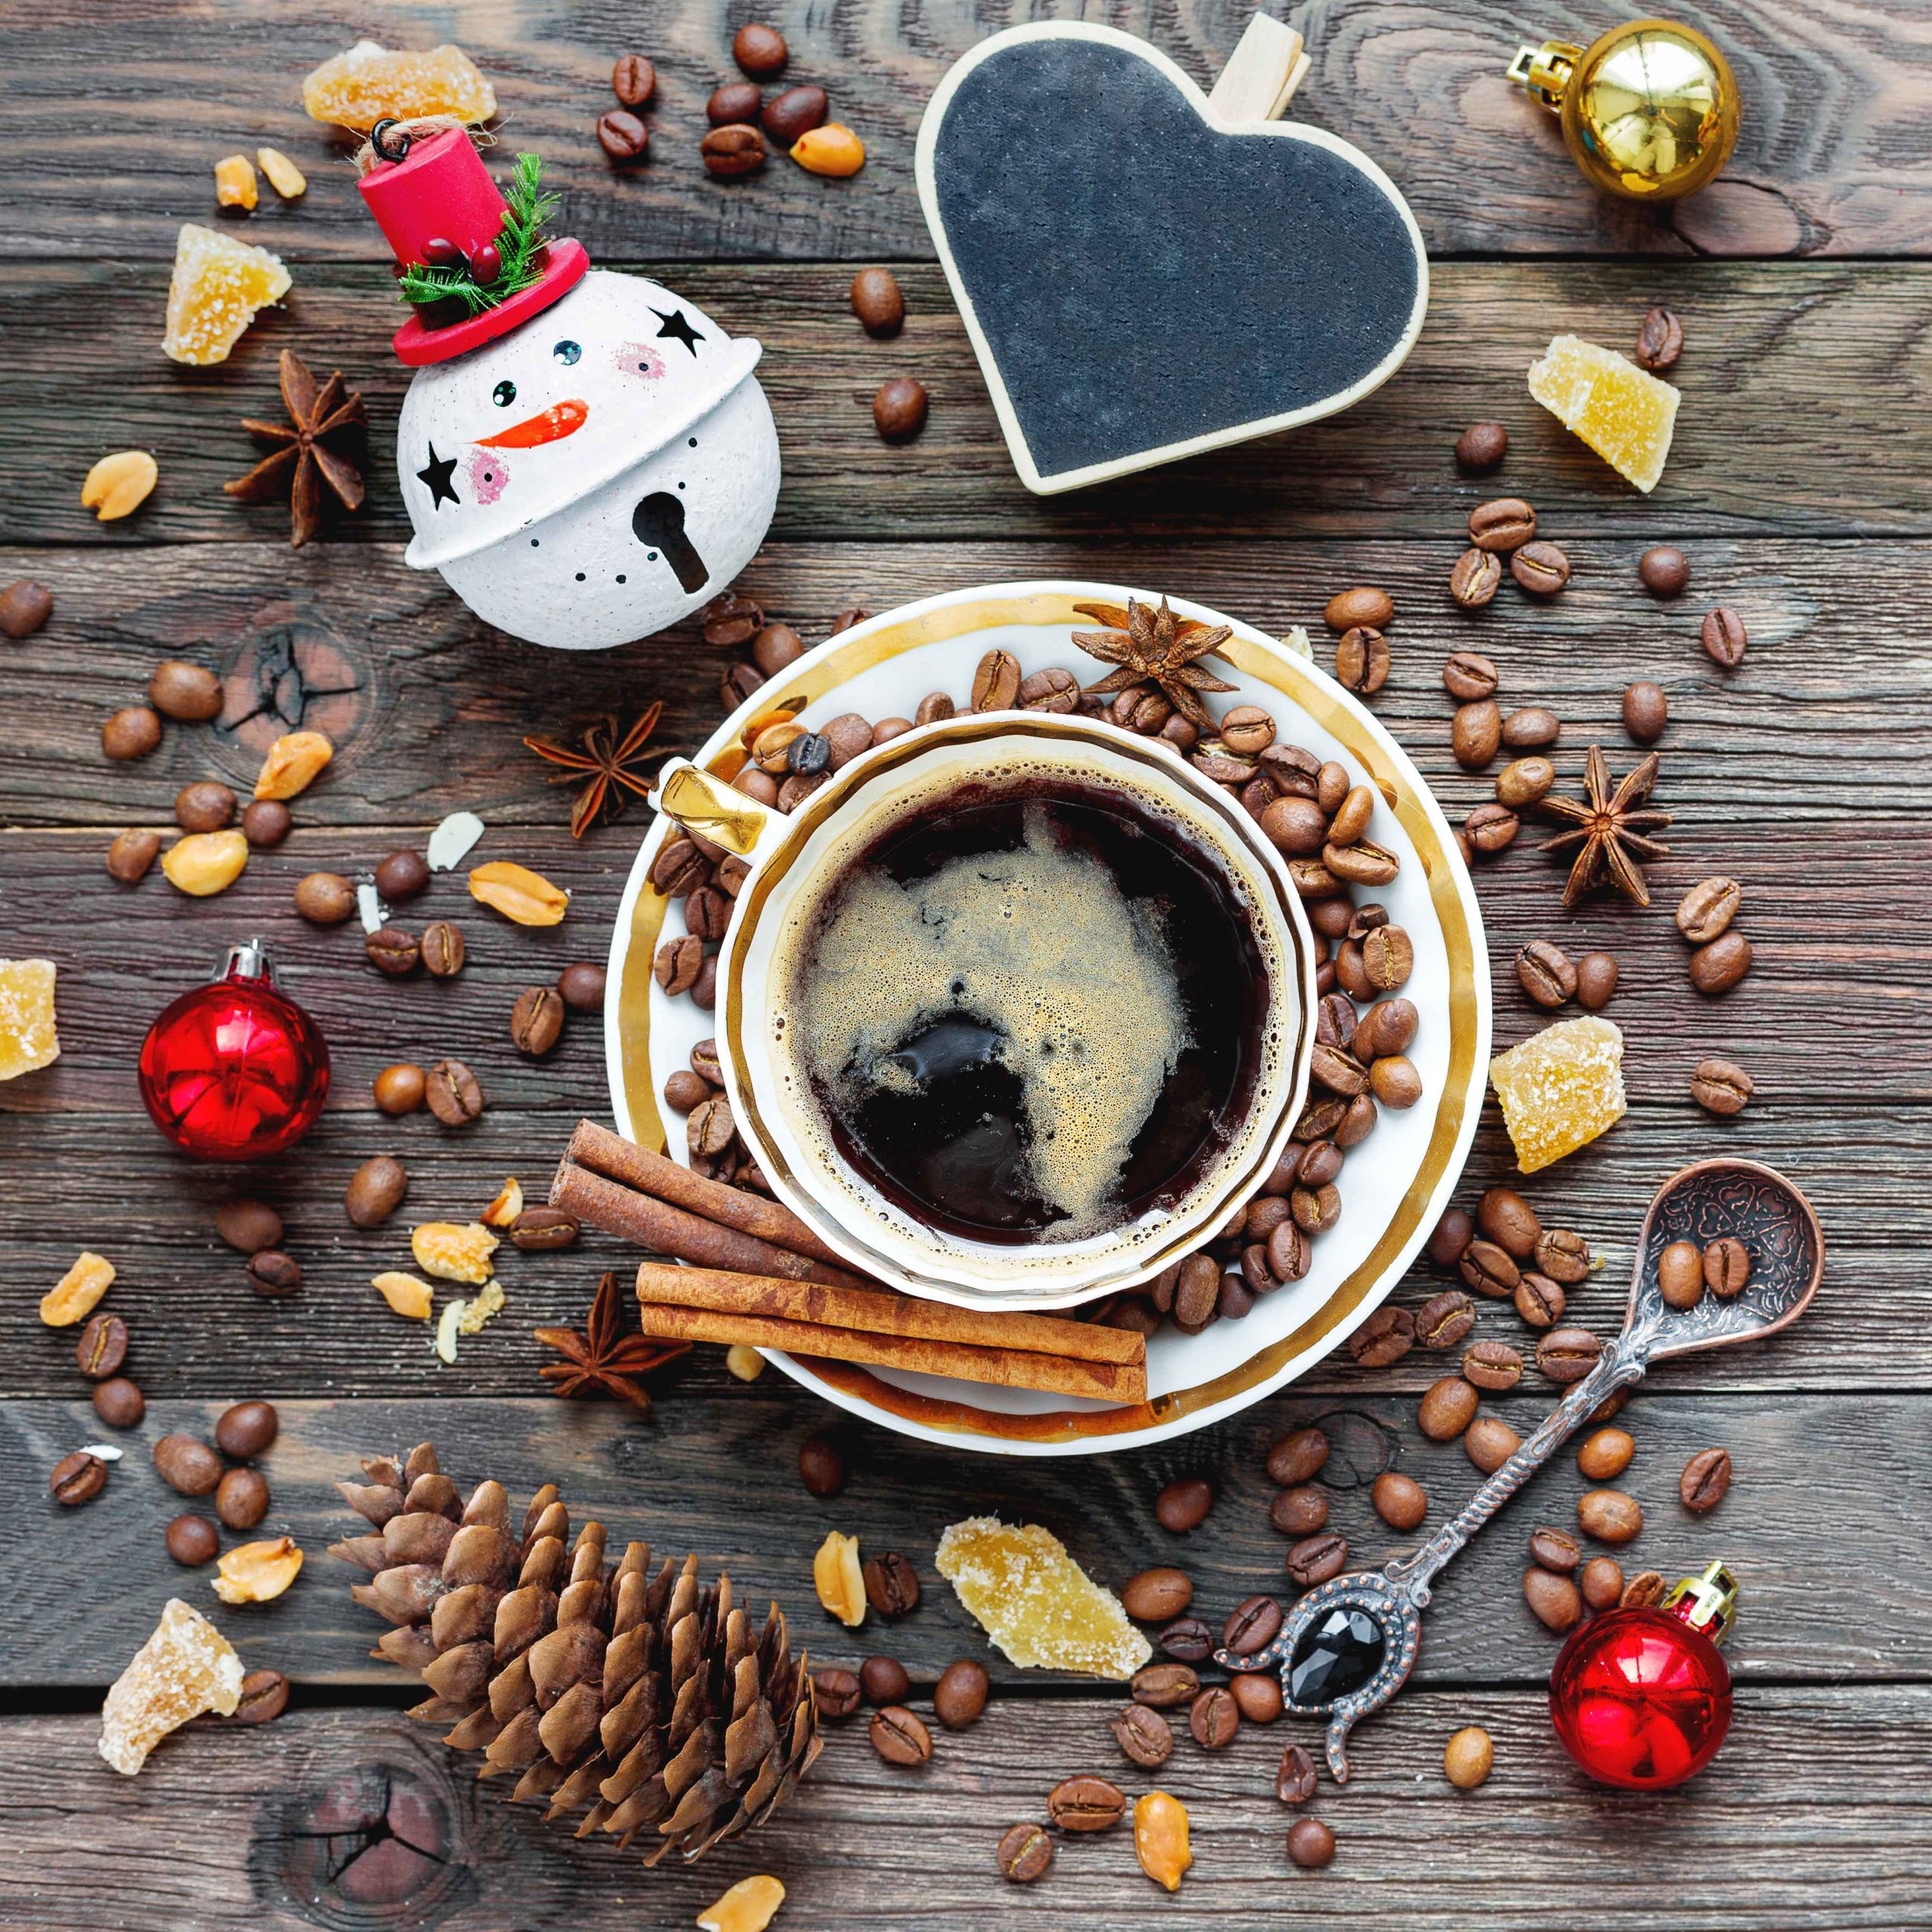 New York City Office Coffee | Healthy Foods | Break Room Holiday Solutions